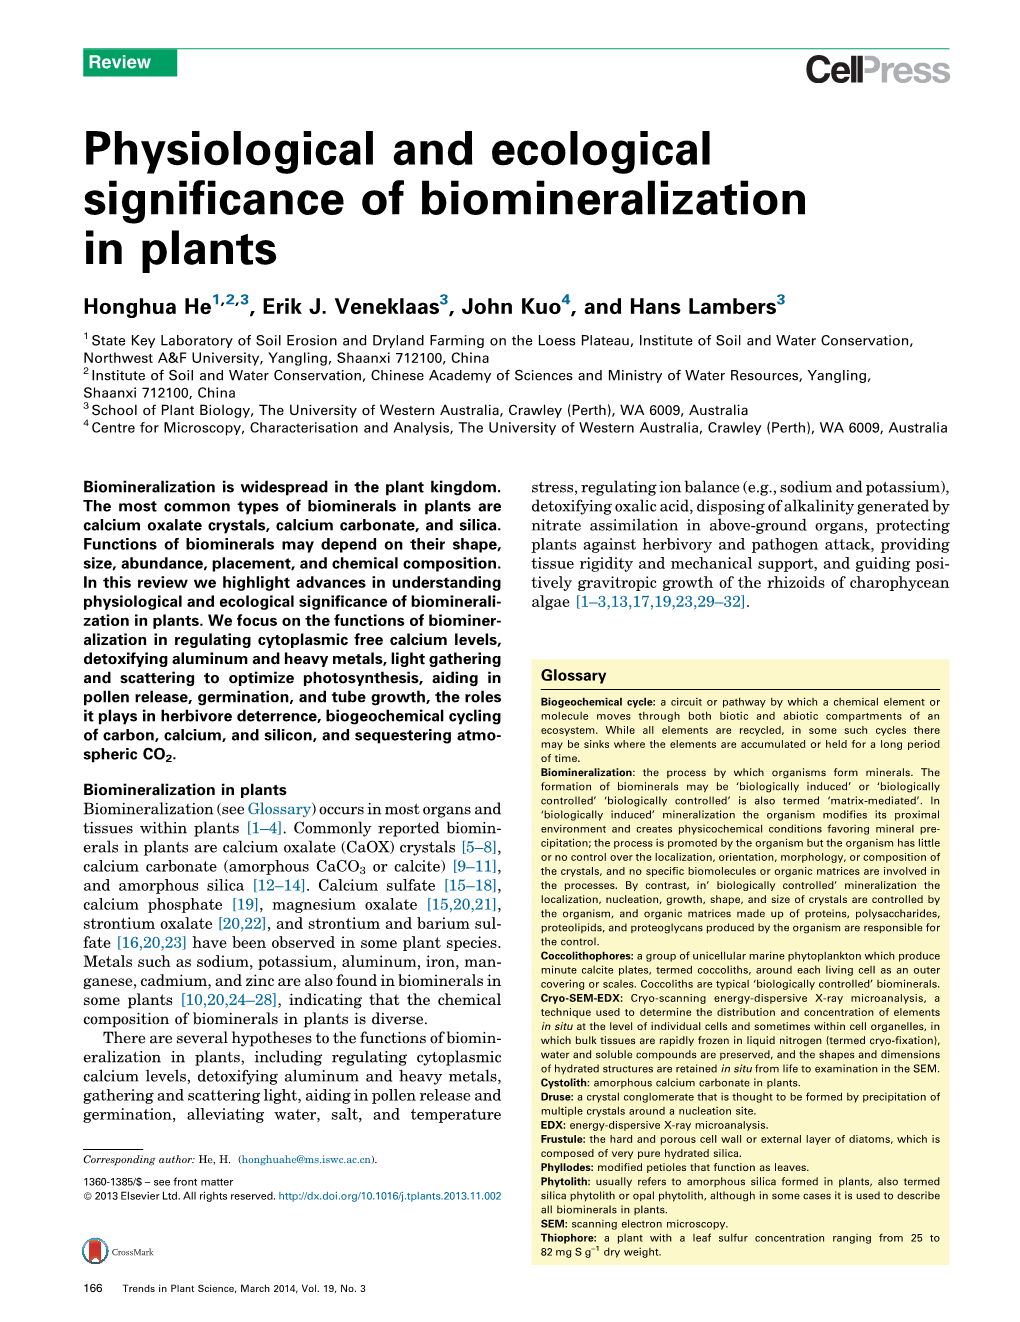 Physiological and Ecological Significance of Biomineralization in Plants